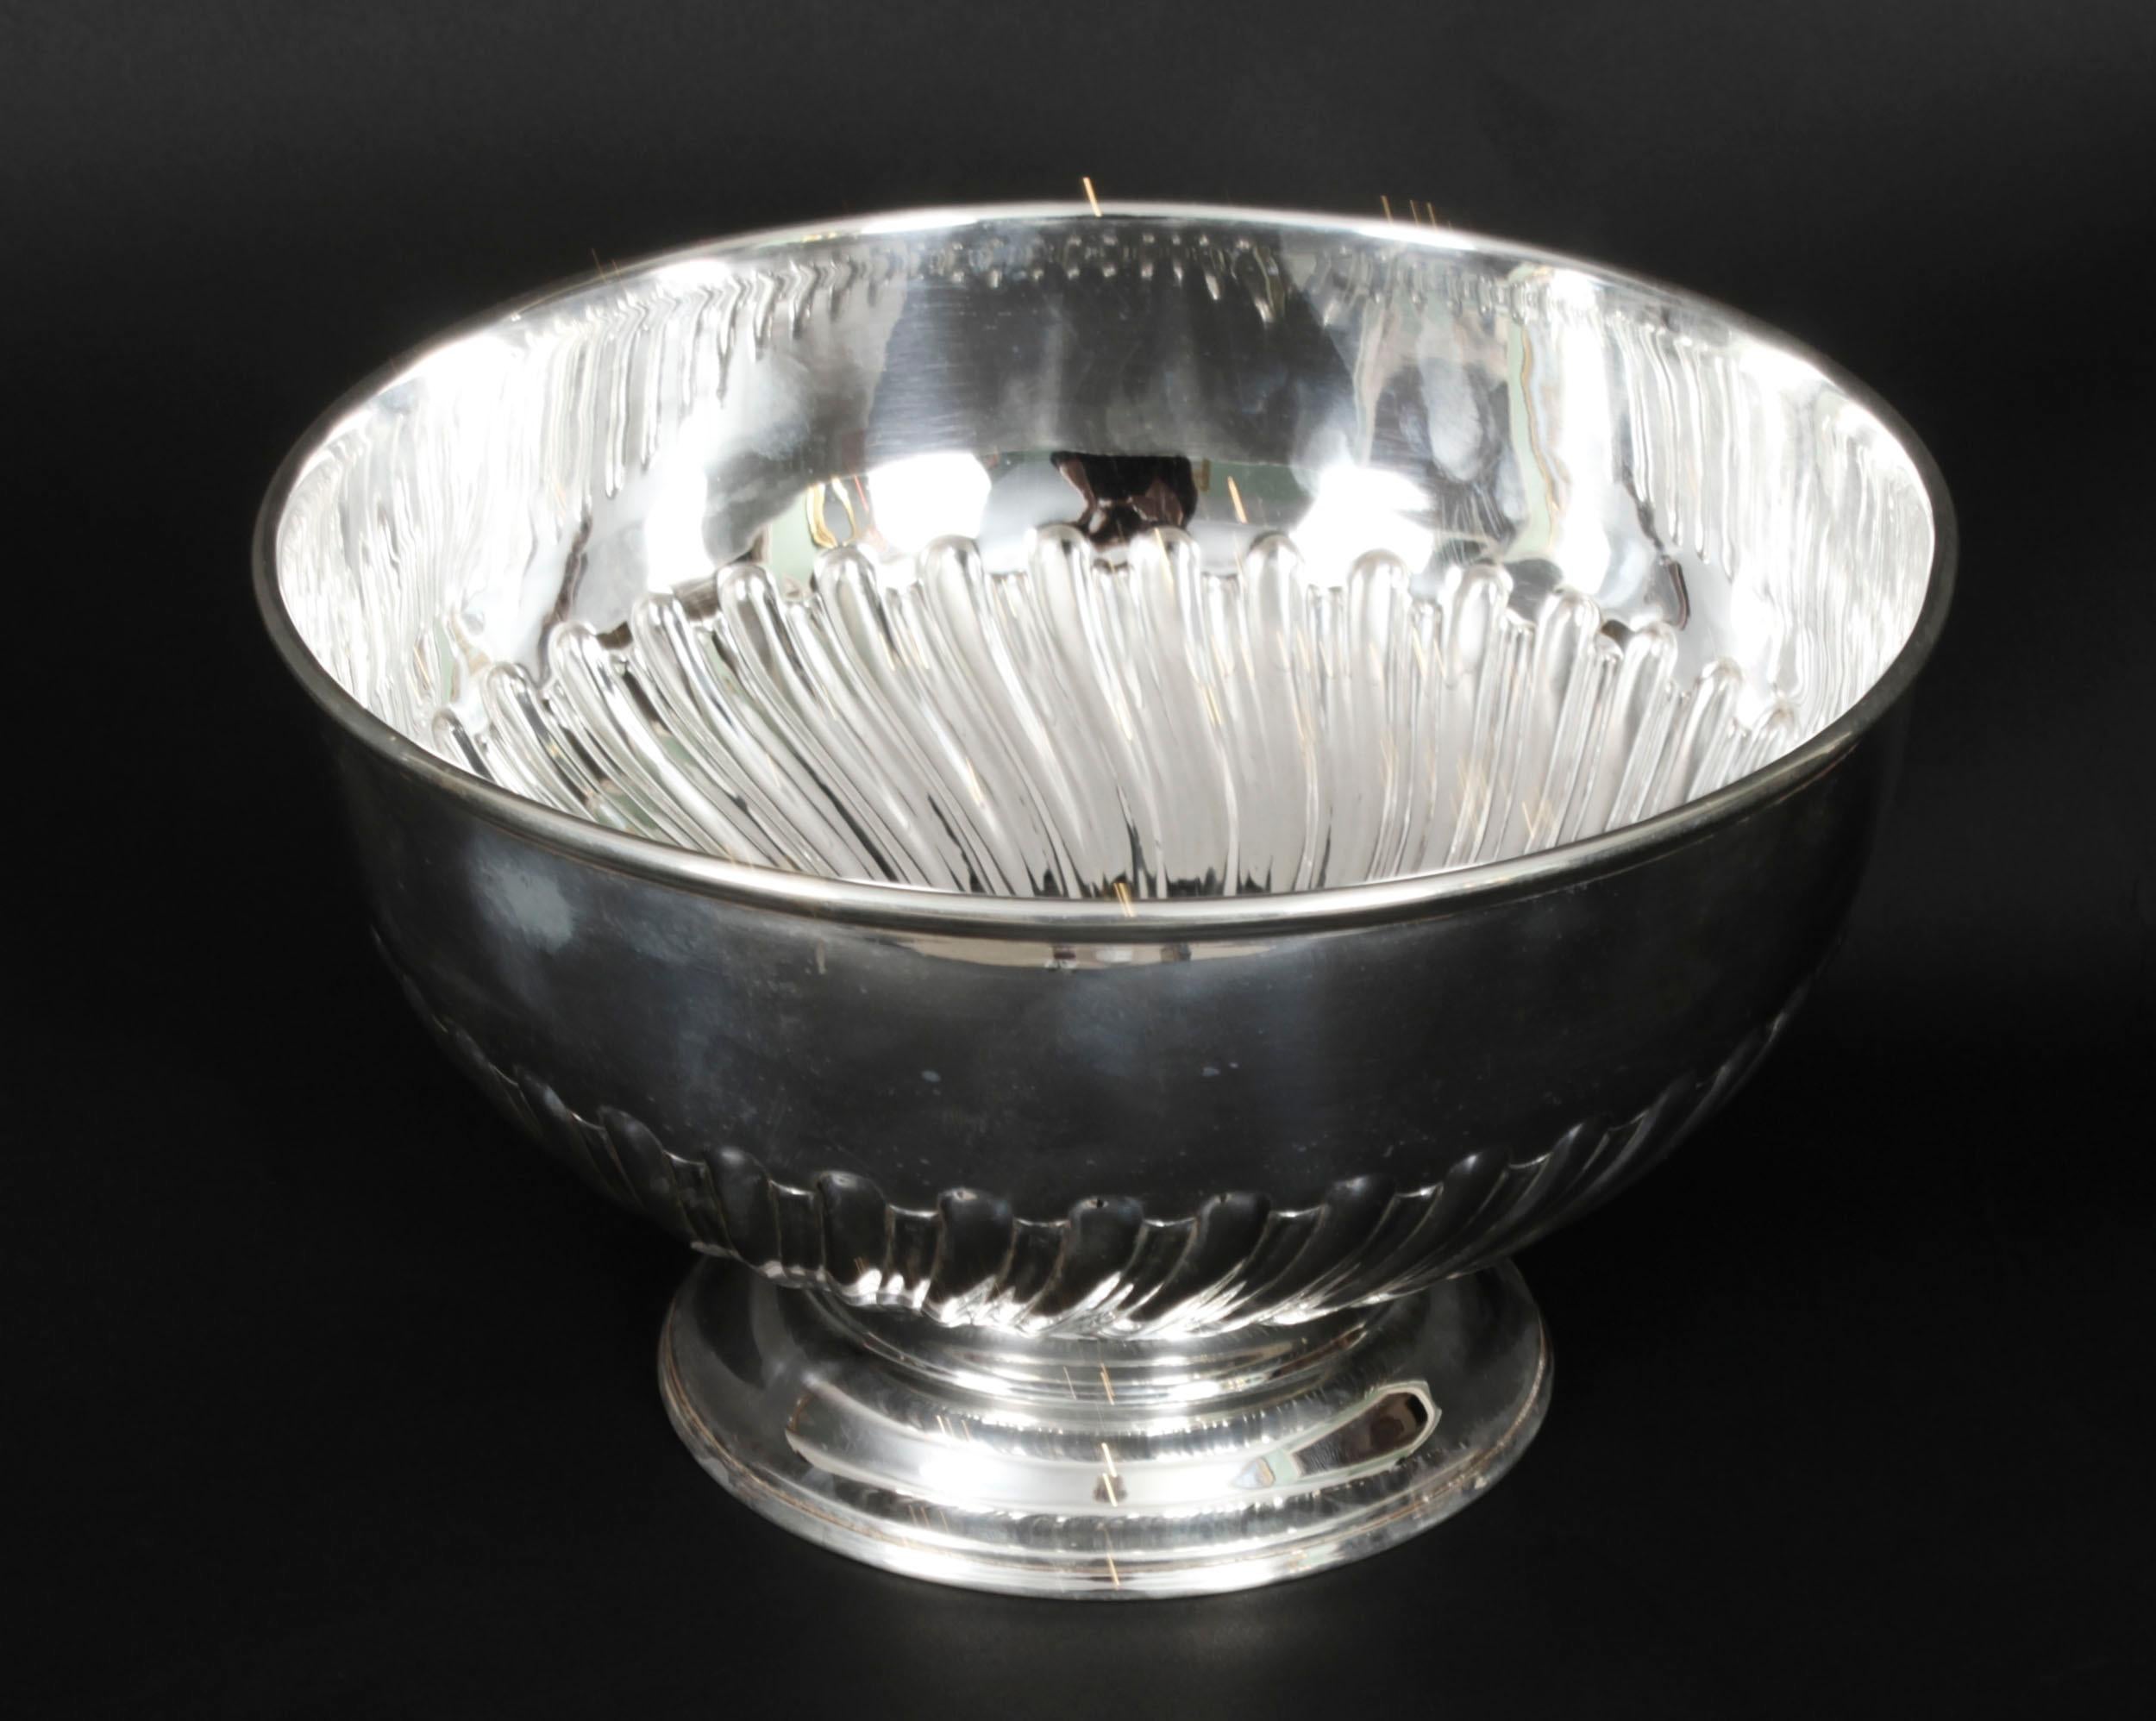 This is a gorgeous antique Victorian silver plate on copper pedestal punch bowl or wine cooler,  Circa 1860 in date and bearing the makers mark C&Co for Carrinfton, 130 Regent Street, London.
 
This exquisite punch bowl has beautiful fluted hammered